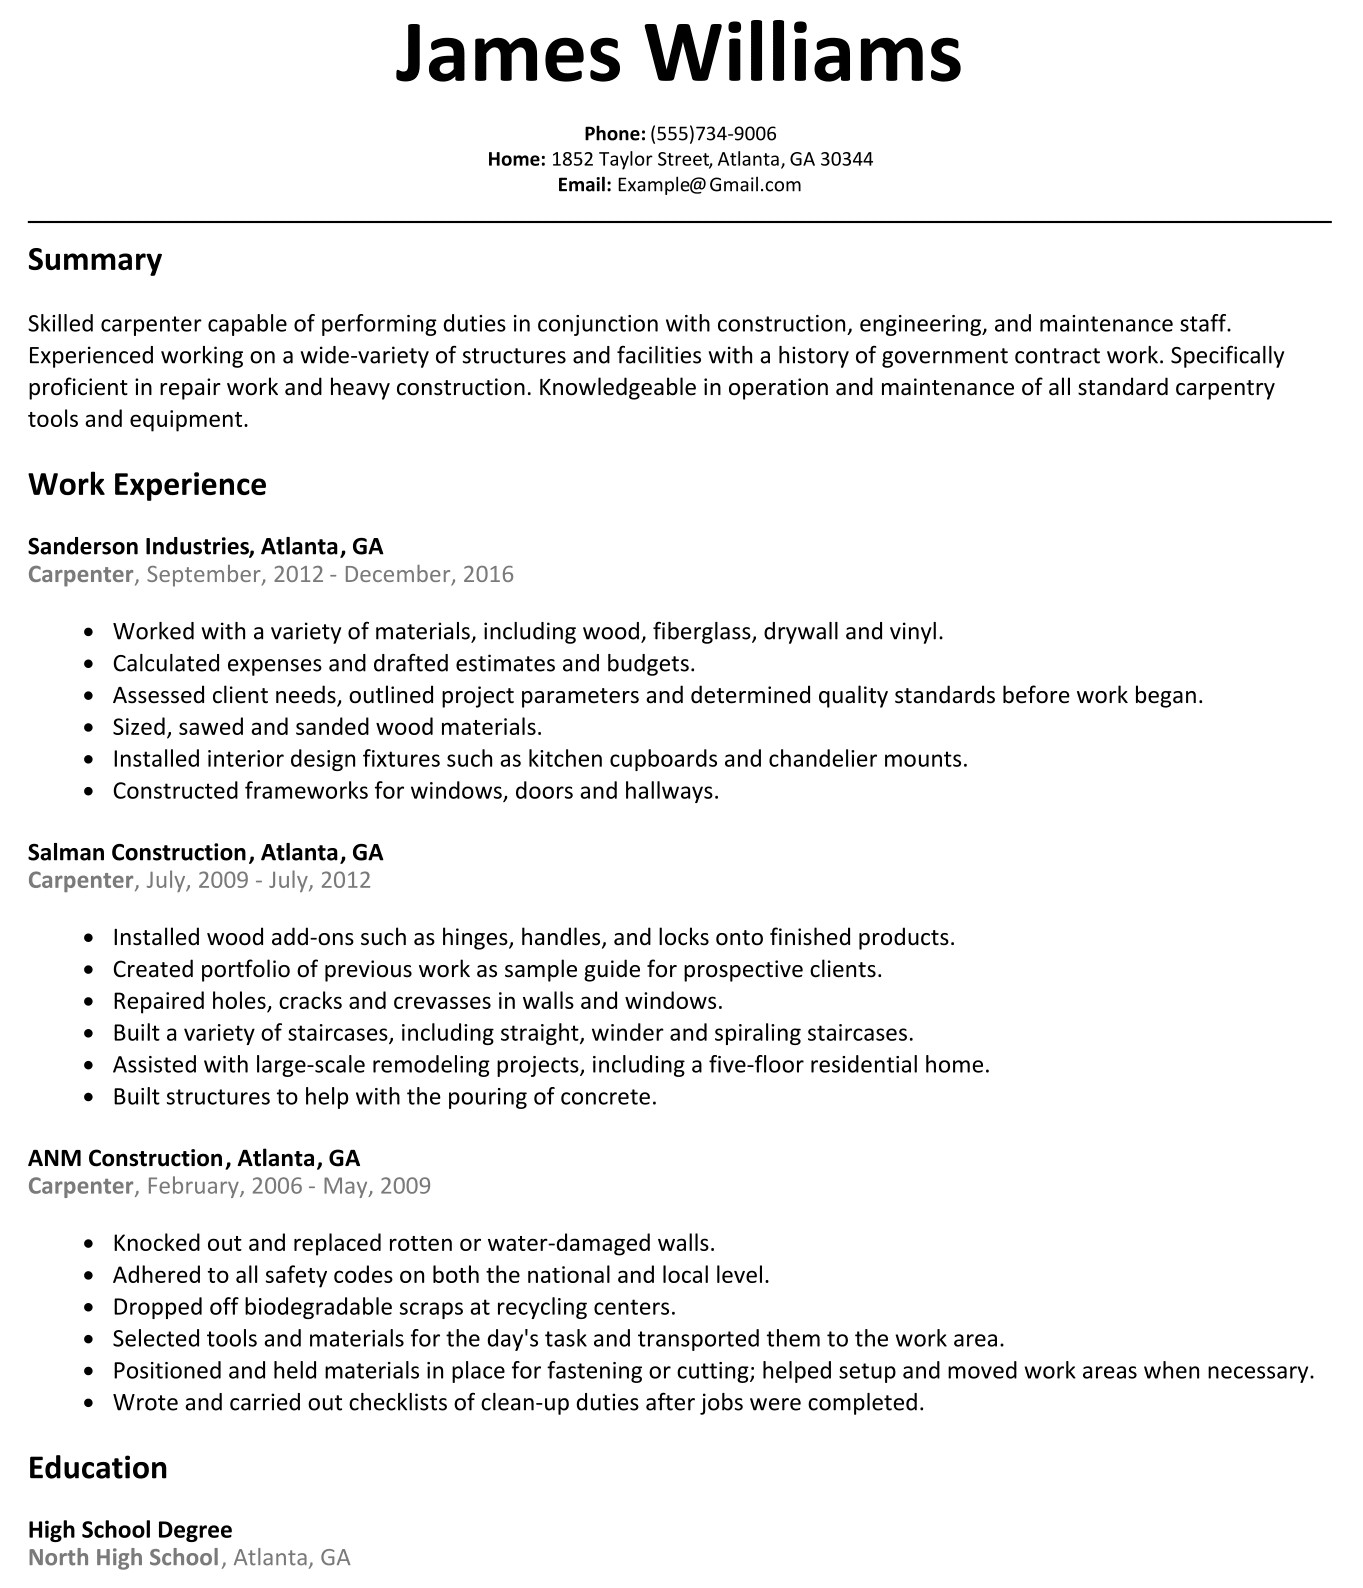 Resume Template Resume Template Free Australia Ownforum Org For inside size 1363 X 1588